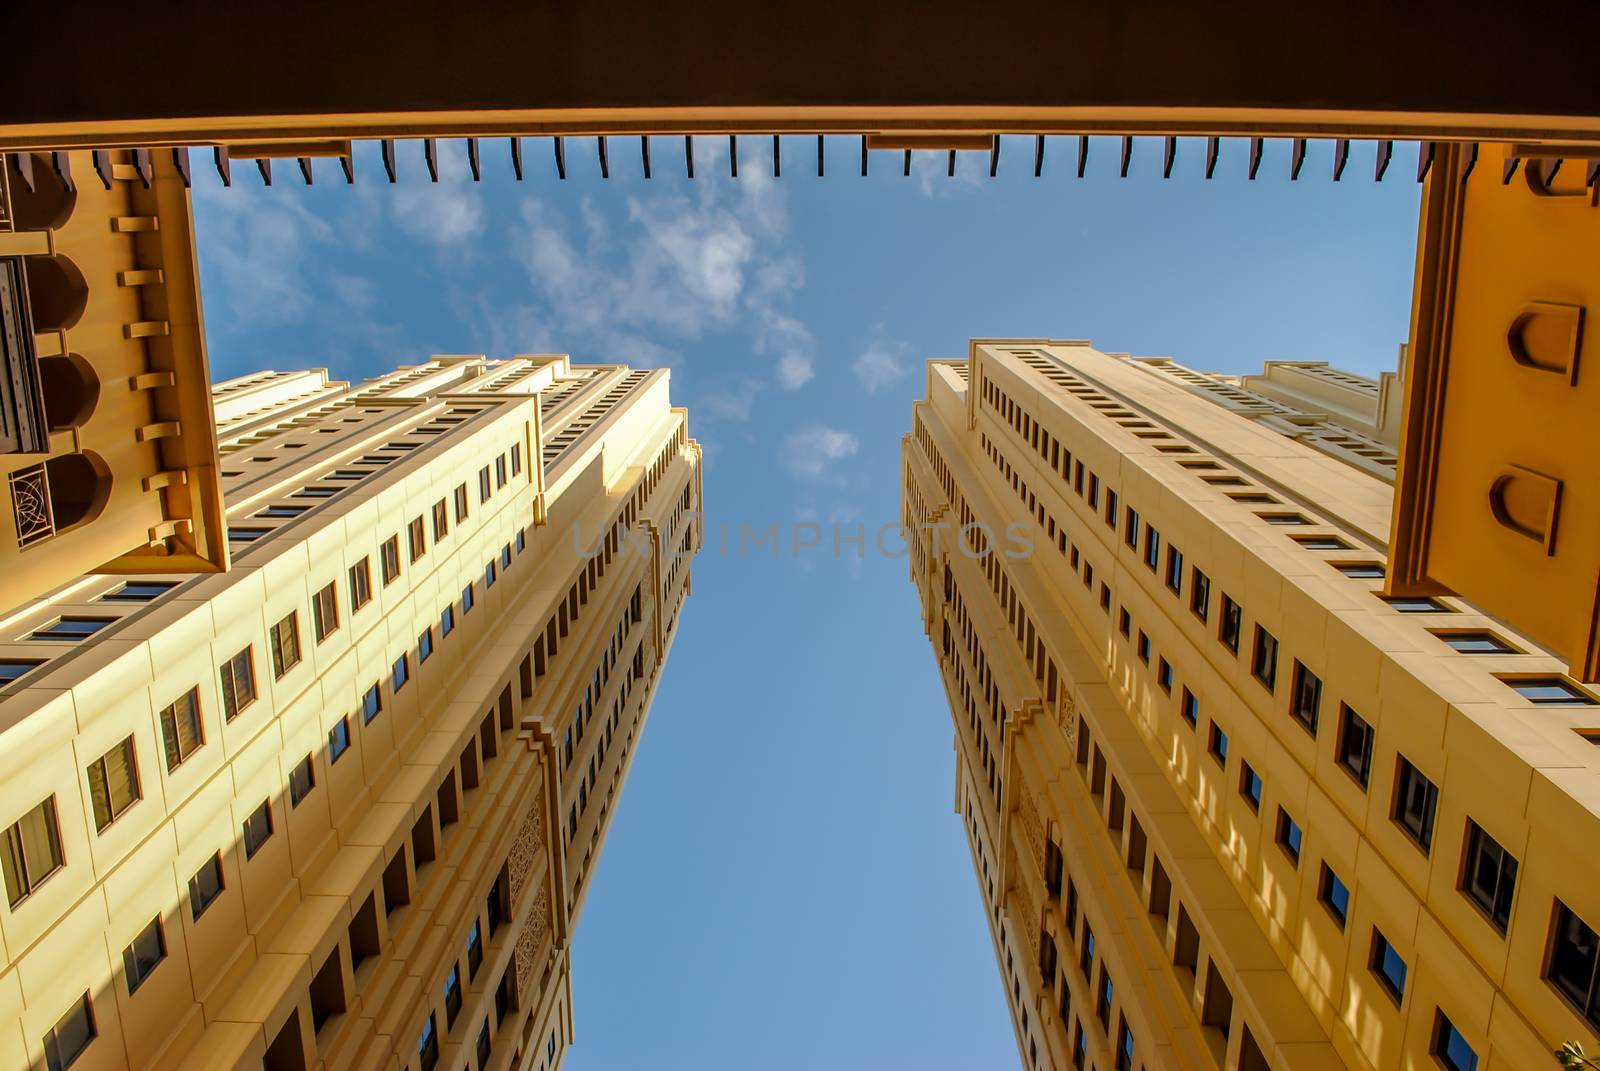 Skyscraper Offices - office architecture, low angle view - horizontal image